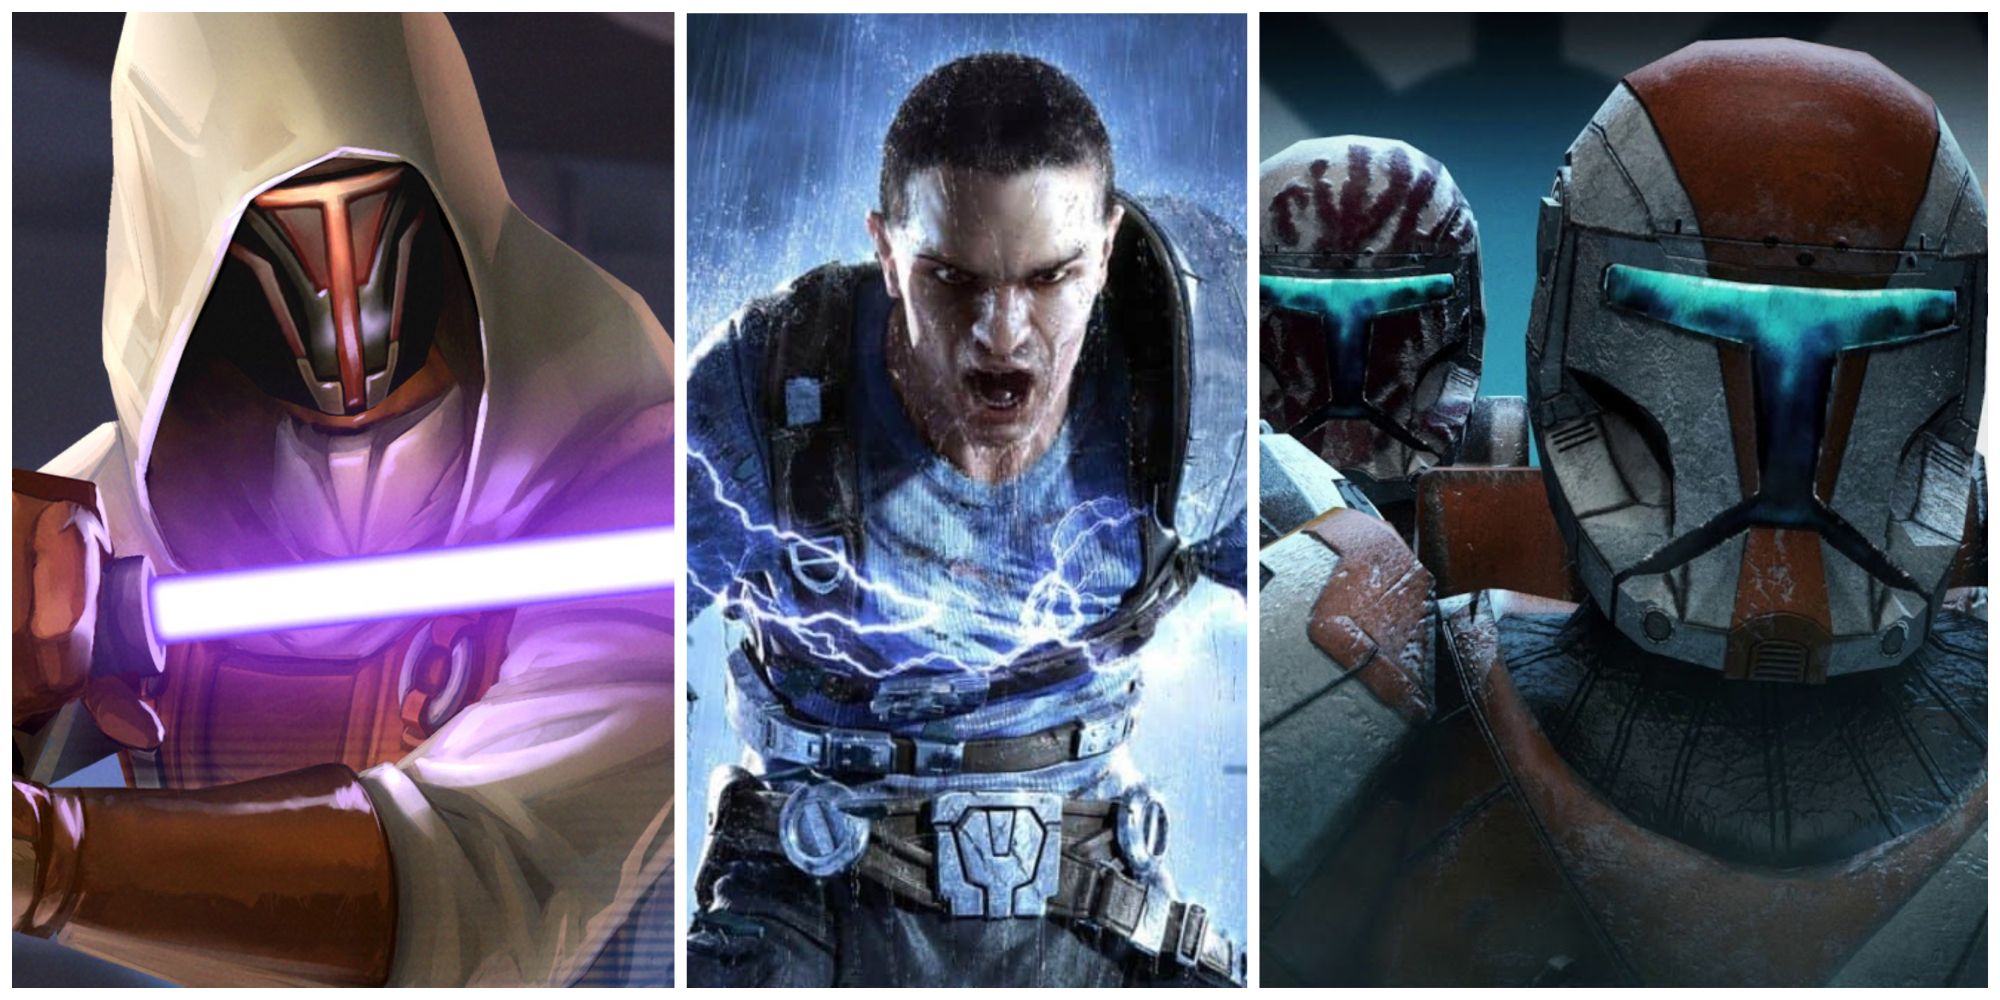 Star Wars characters Revan, Starkiller, and Boss